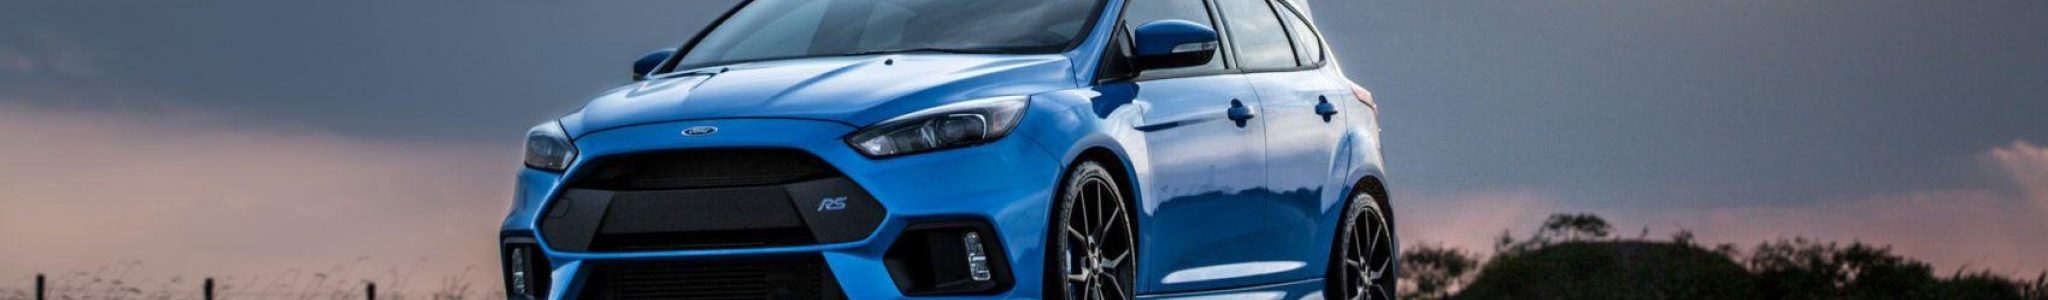 2016_2018_focus_rs_banner